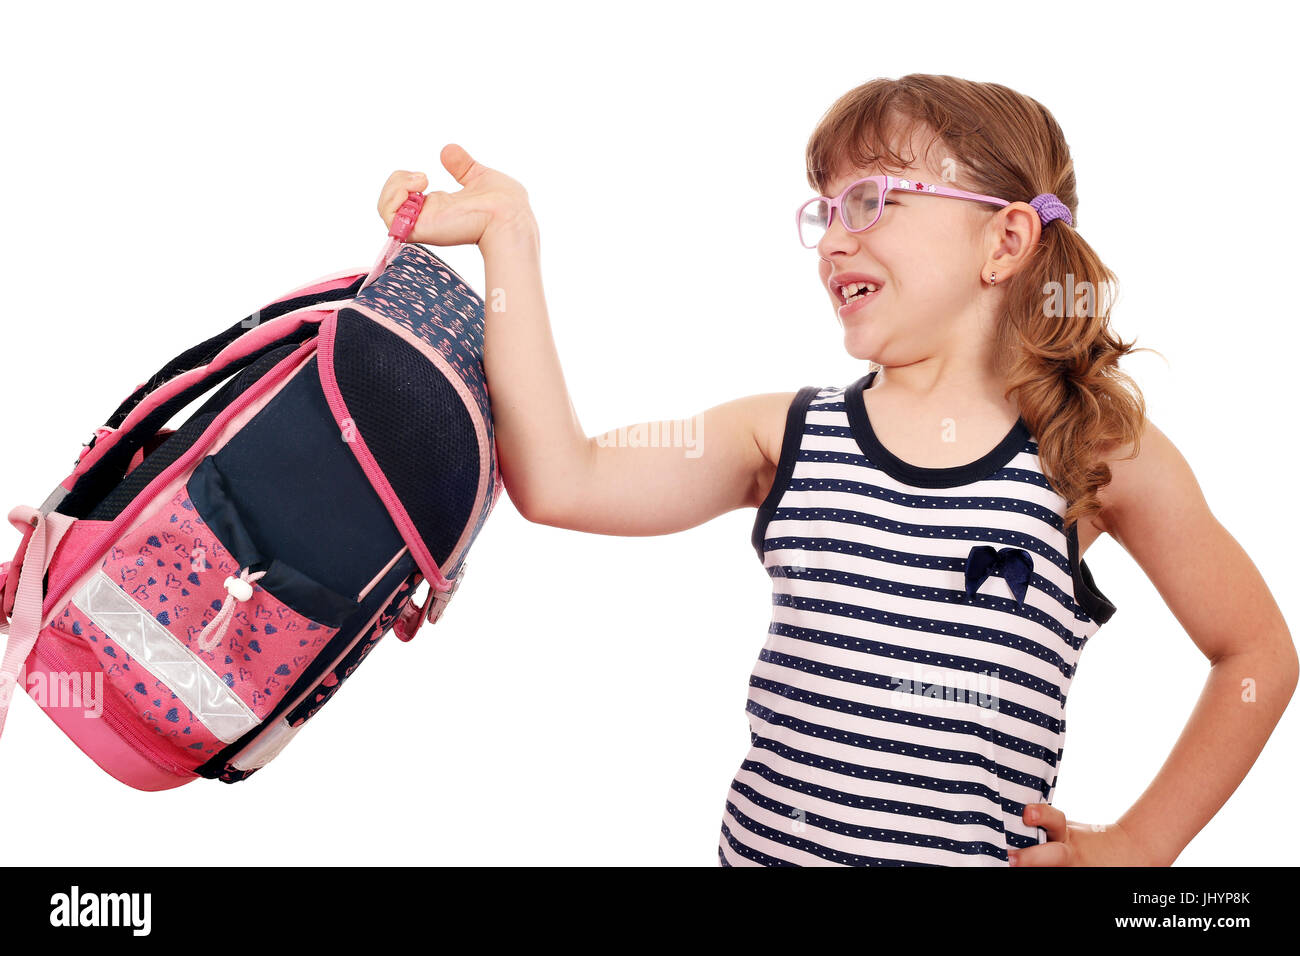 little girl trying to lift heavy schoolbag Stock Photo